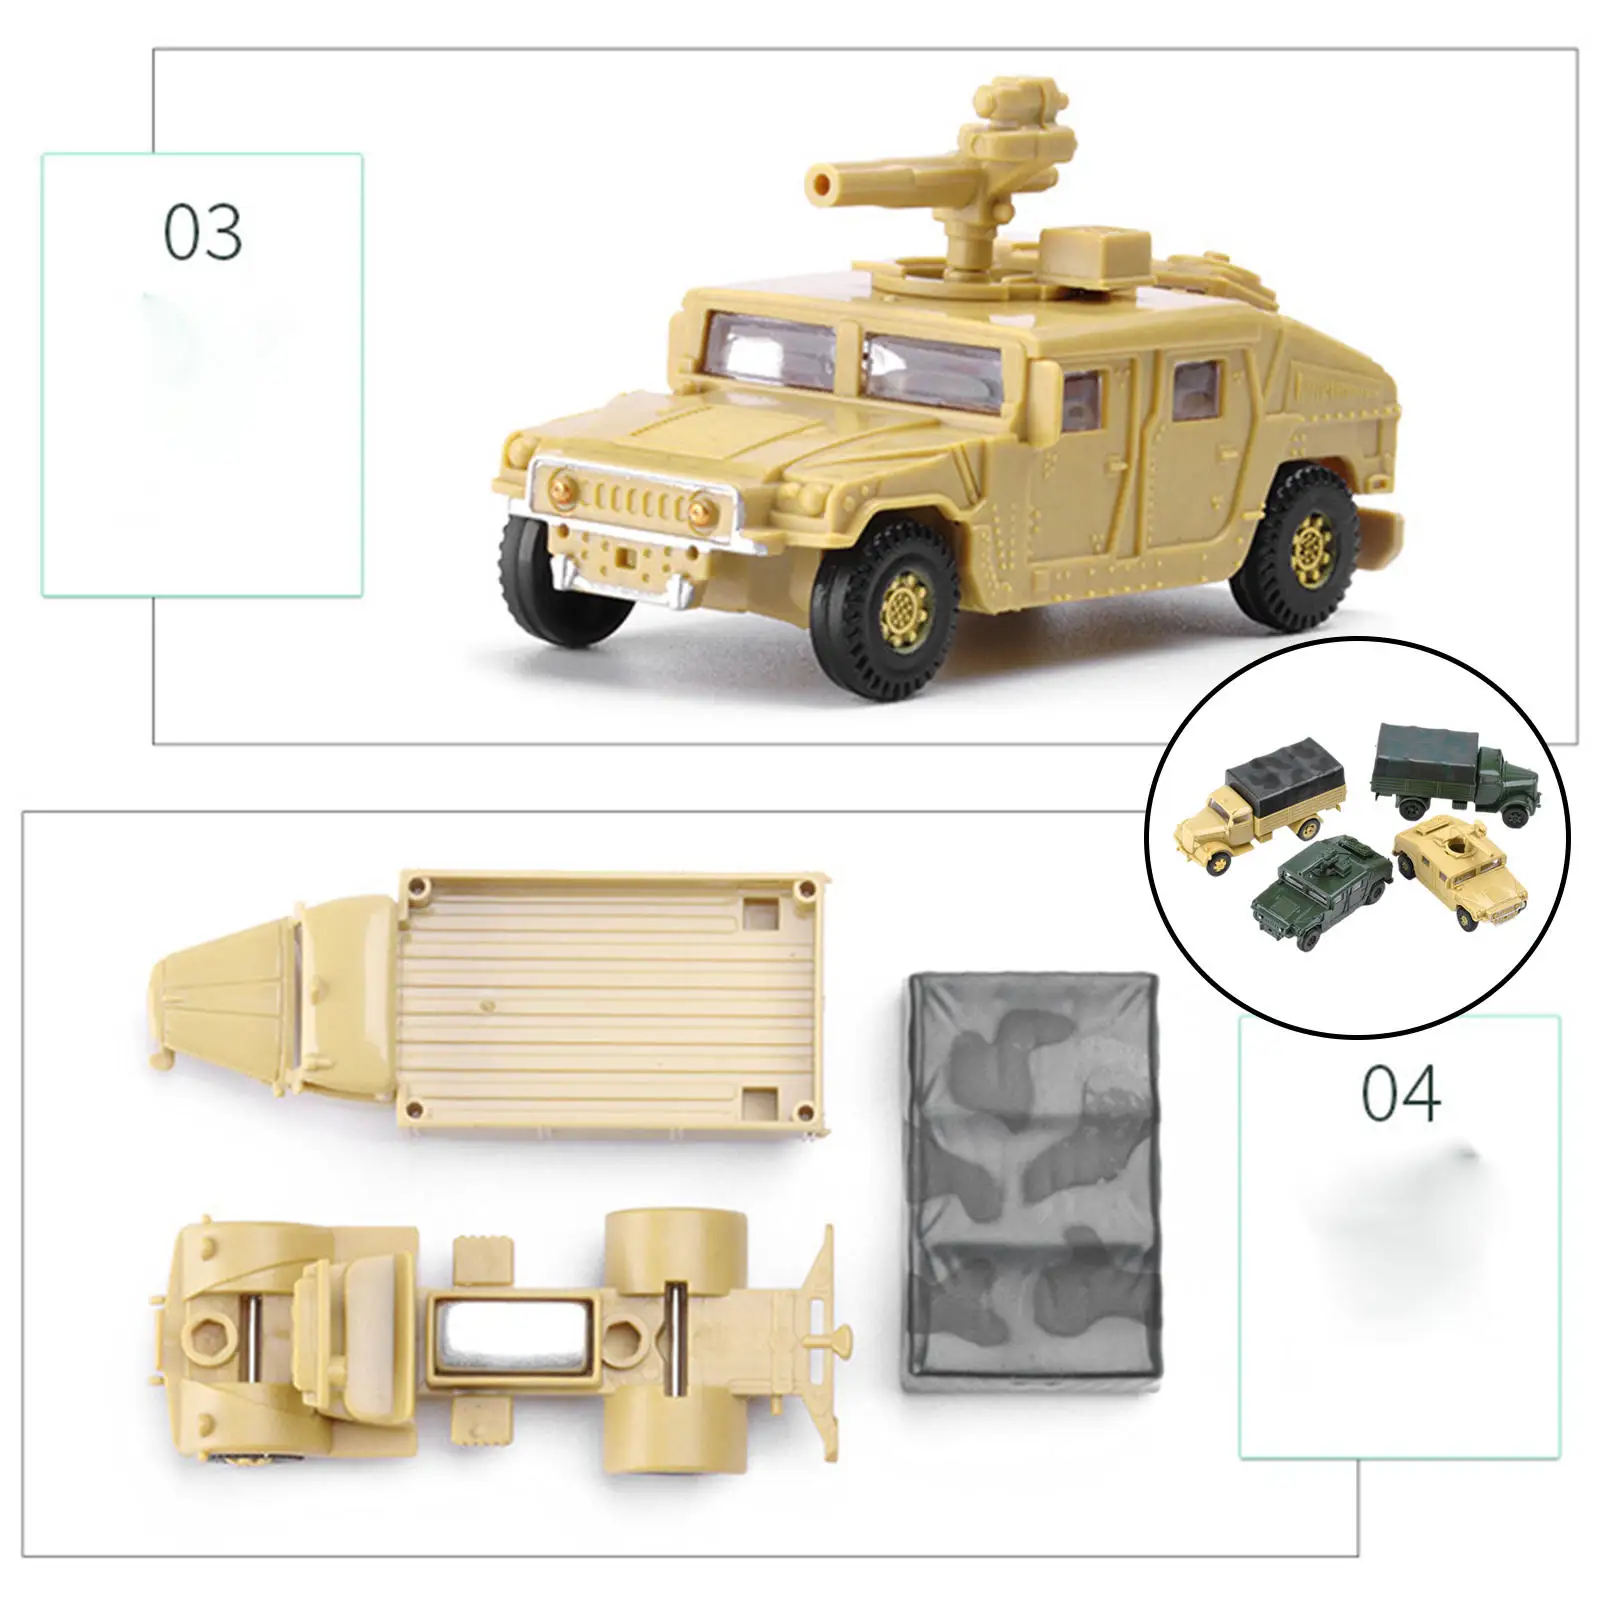 4Pcs 1/72 Vehicle Model Toy Micro Landscape Educational Toy Collectibles